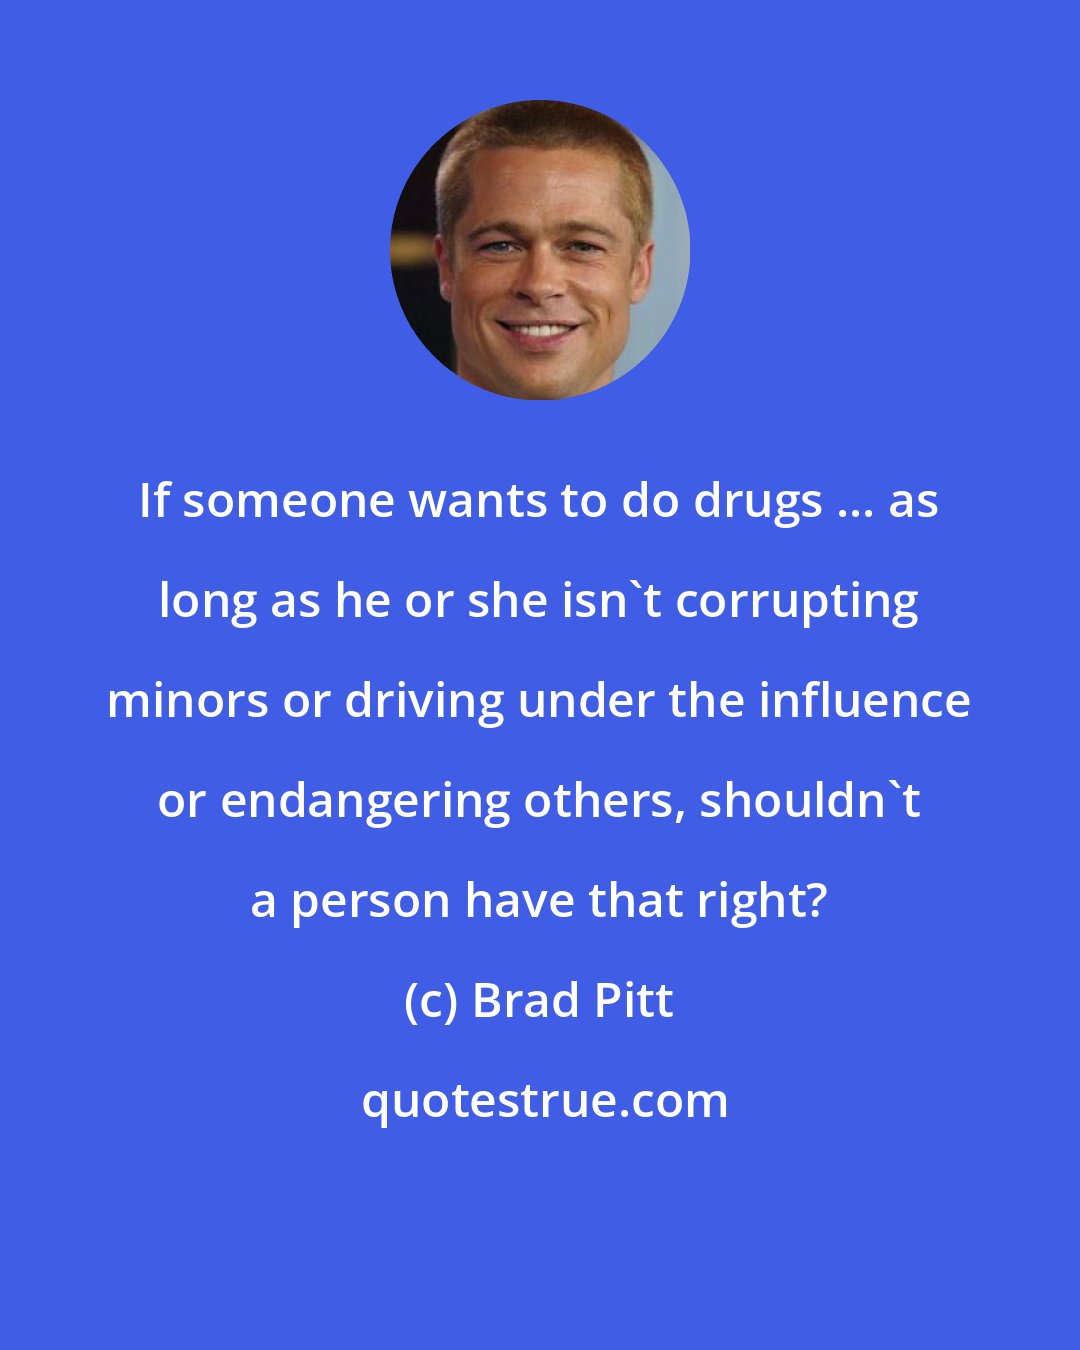 Brad Pitt: If someone wants to do drugs ... as long as he or she isn't corrupting minors or driving under the influence or endangering others, shouldn't a person have that right?